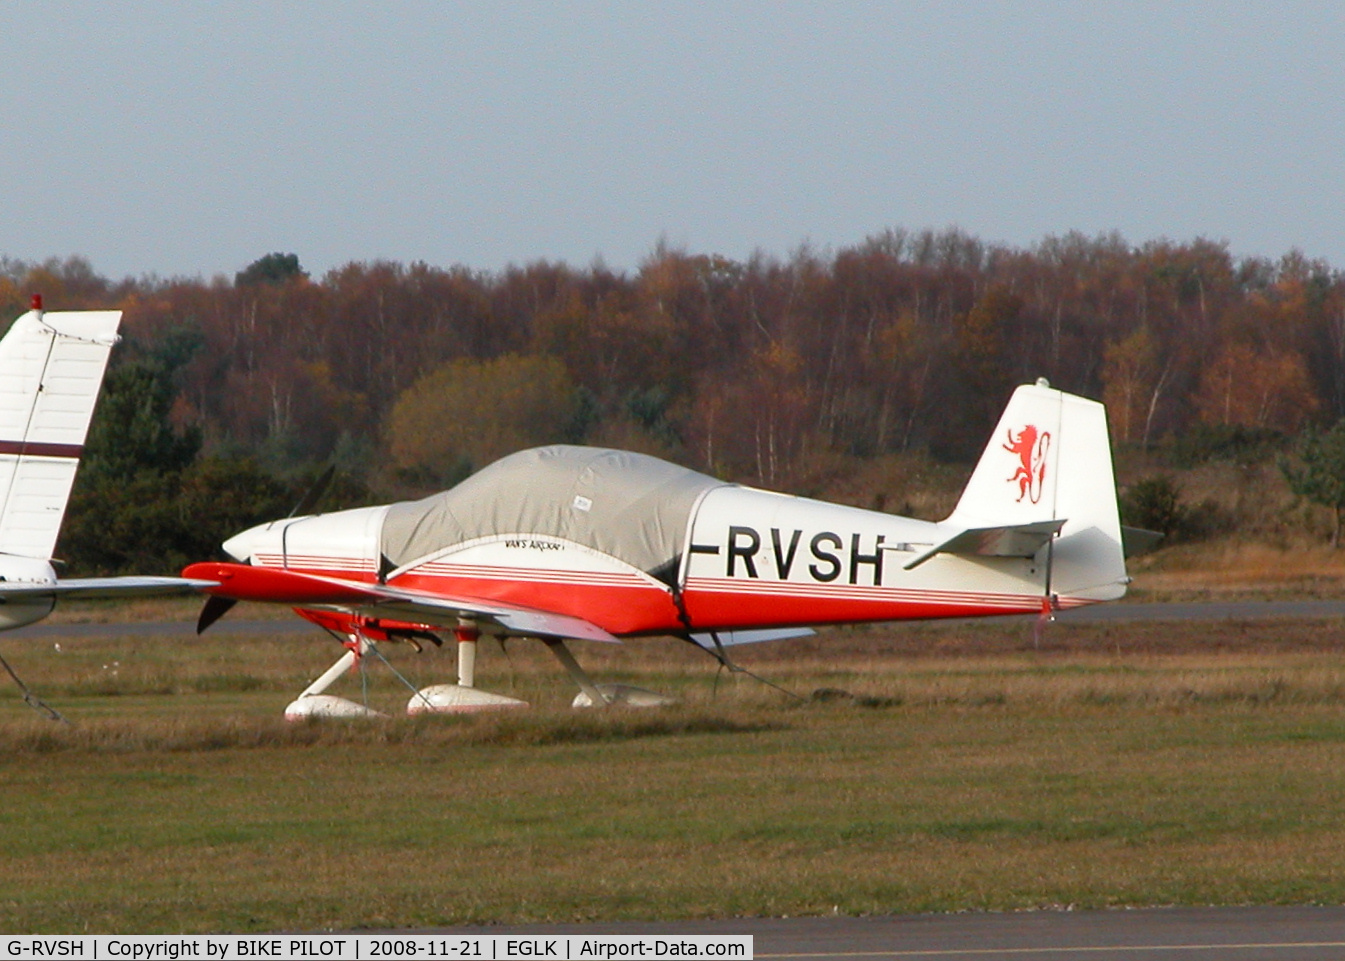 G-RVSH, 2004 Vans RV-6A C/N PFA 181A-13026, DAMAGED SOME TIME AGO WHEN THE NOSE WHEEL DROPPED INTO A HOLE